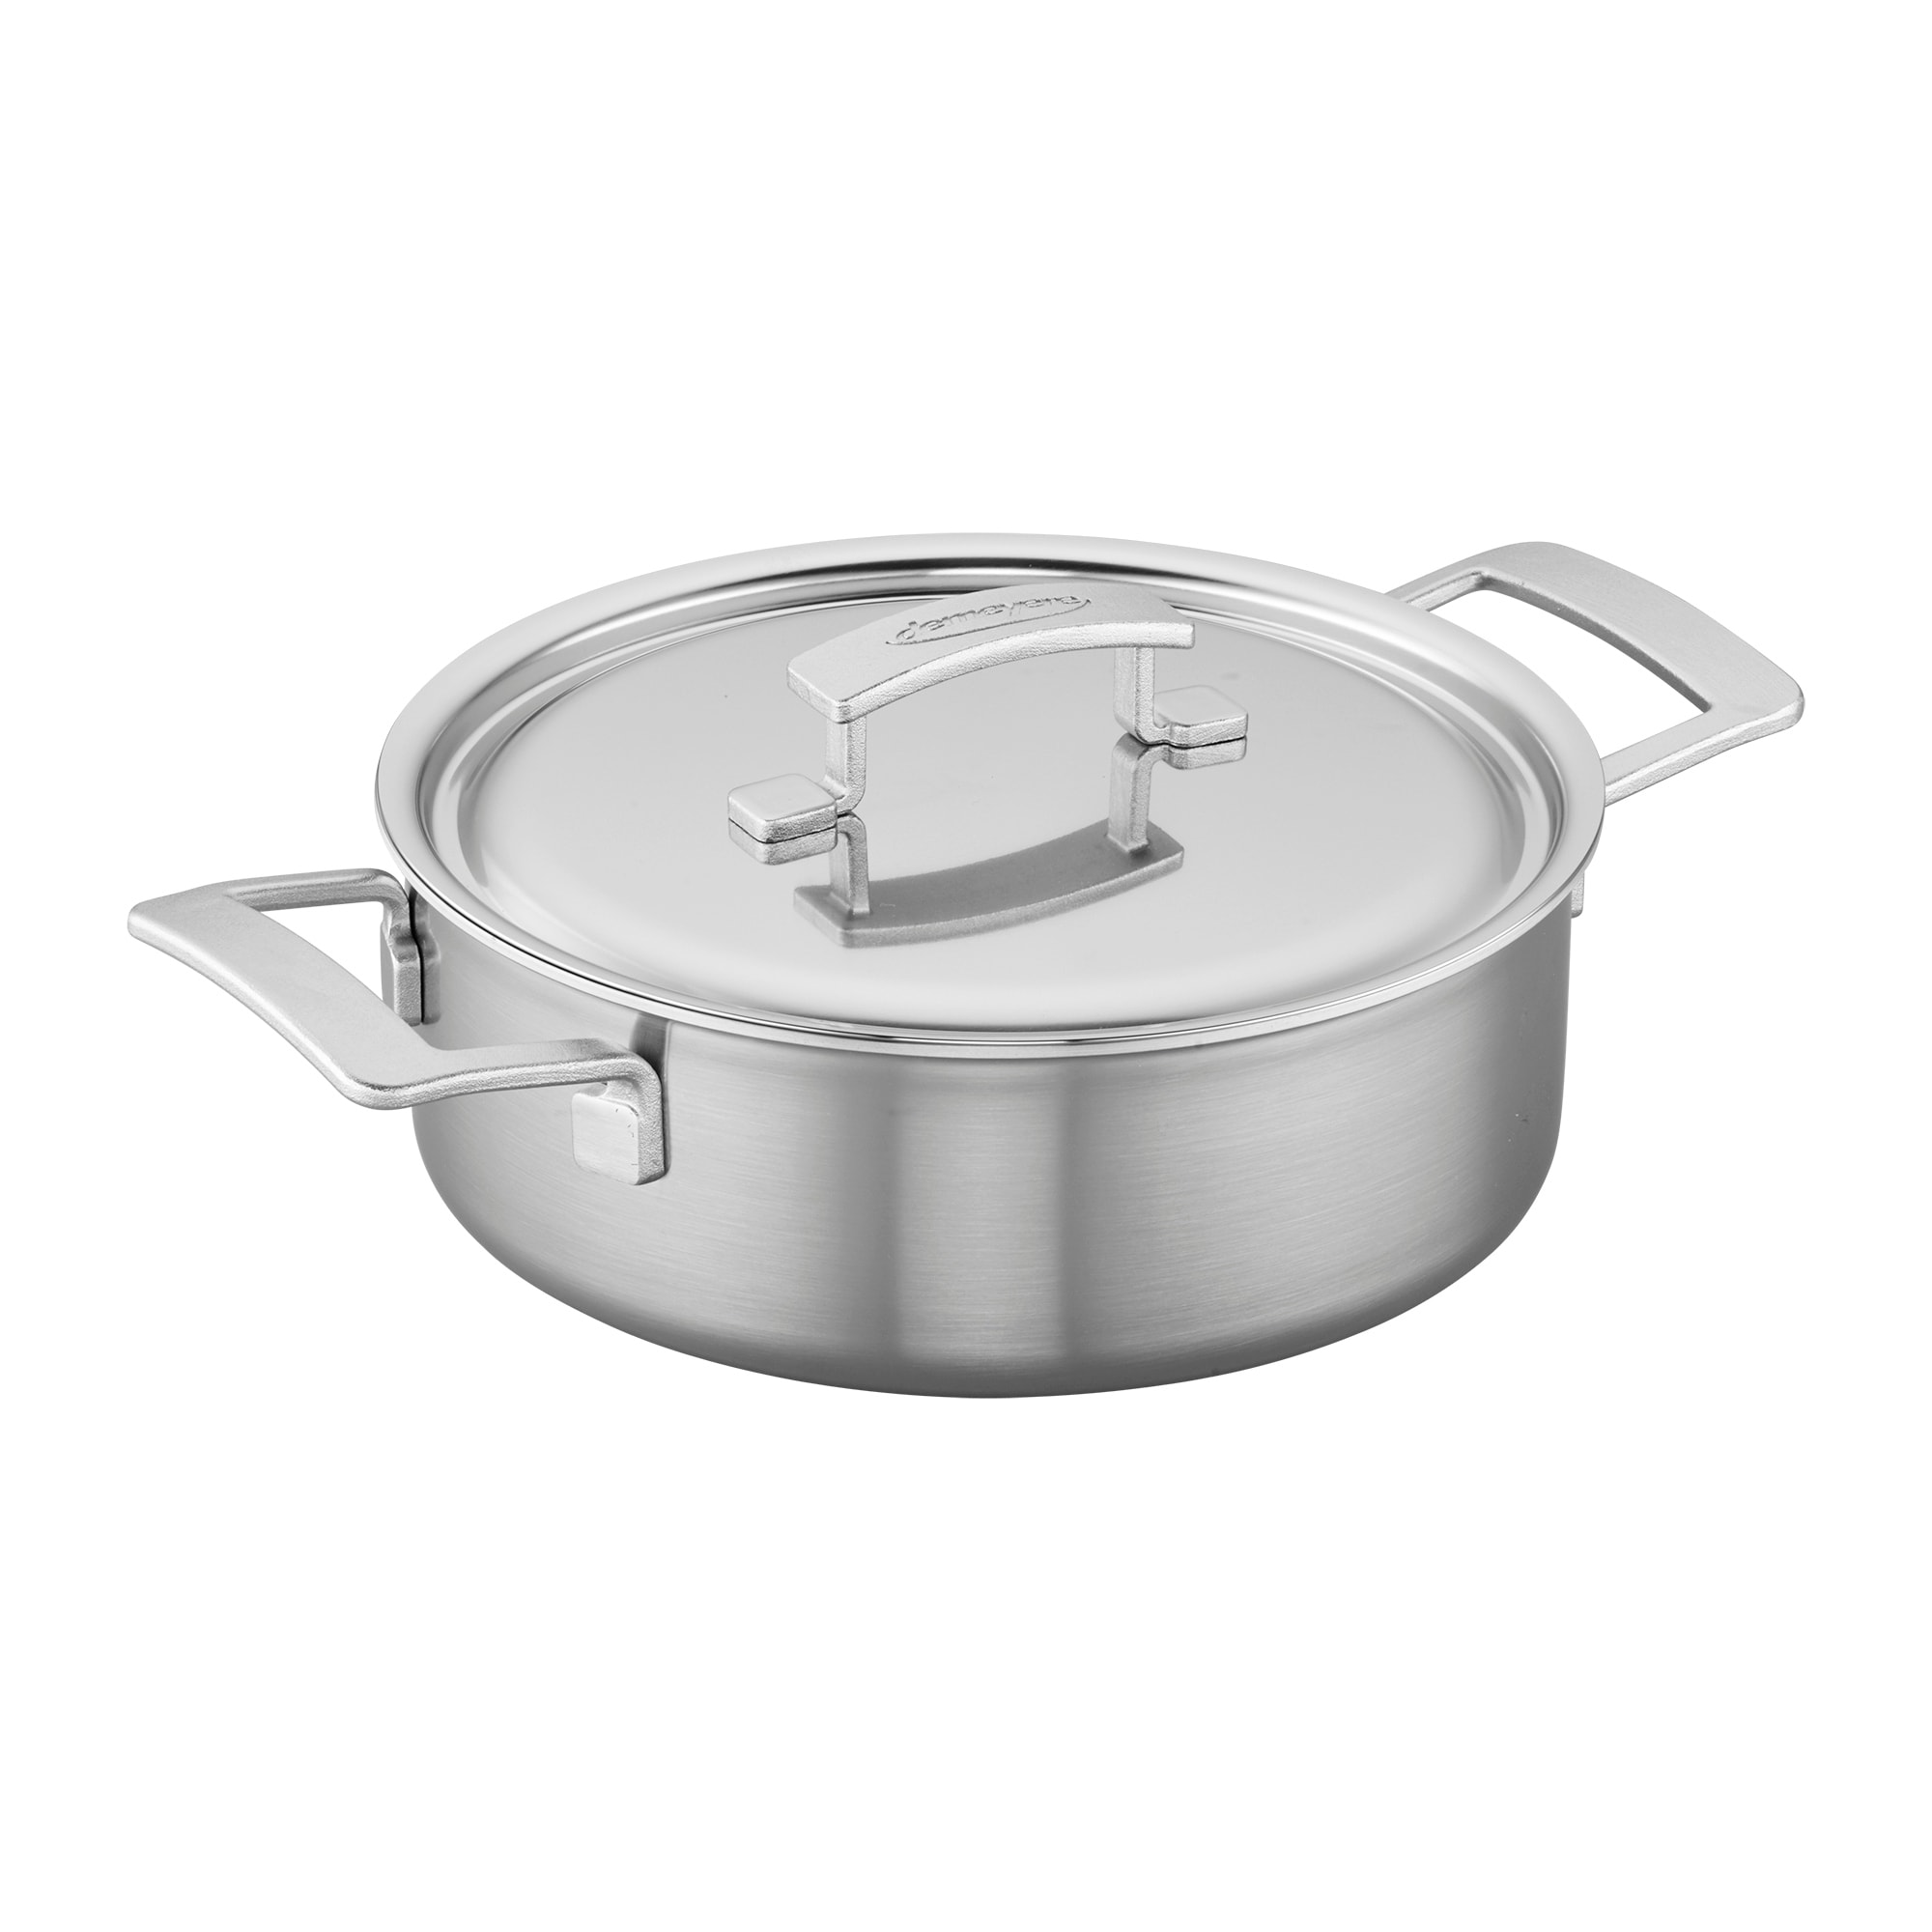 Cooks Standard 1.5 Quart Multi Ply Clad Stainless Steel Sauce Pan